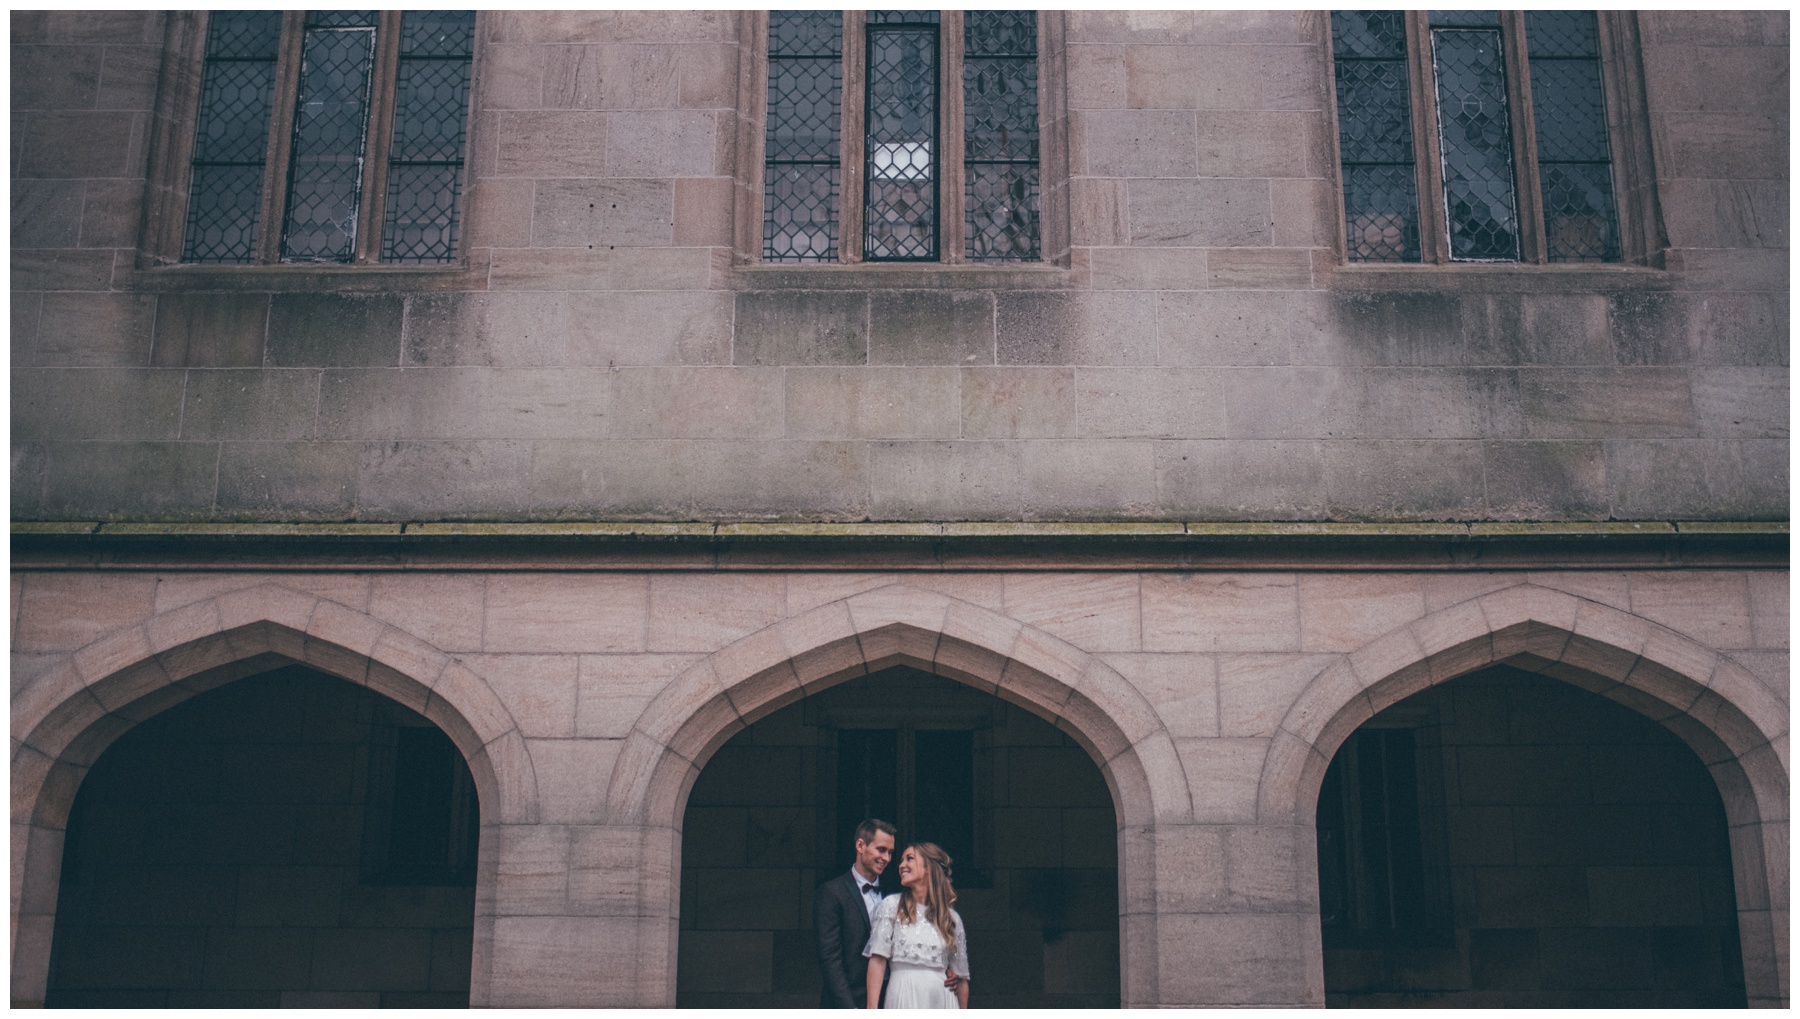 Bride and groom stand together outside gothic old English building in Manchester.